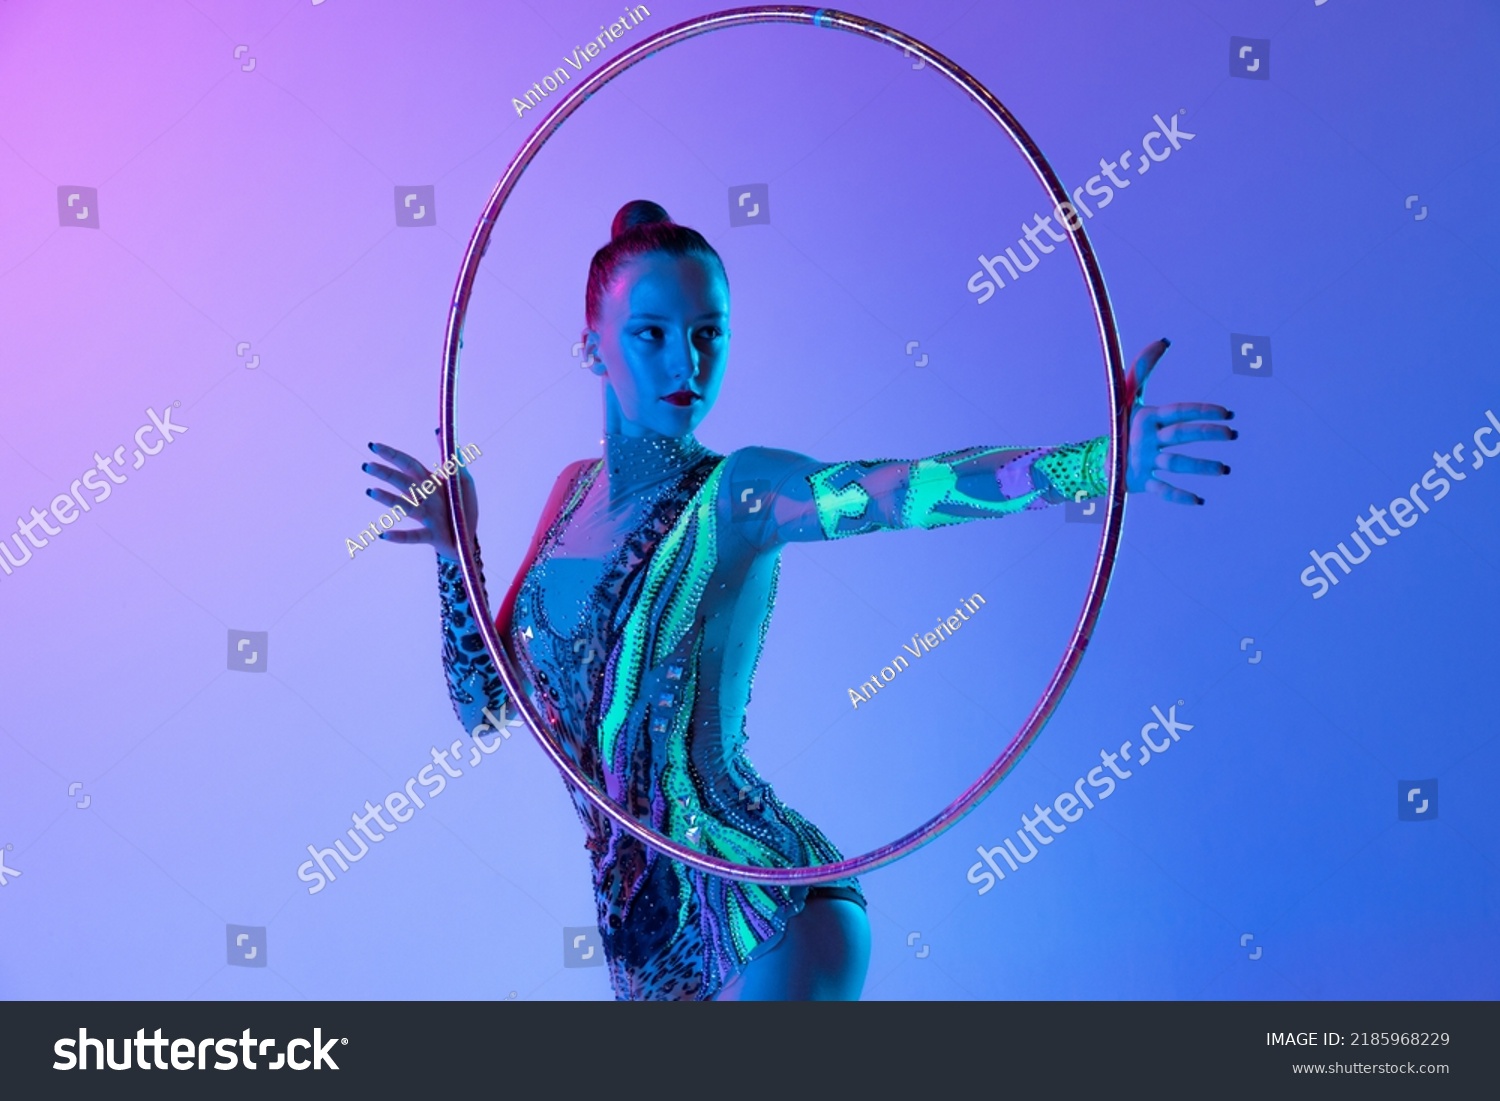 Portrait of young, muscular girl, female rhytmic gymnast training with hoop isolated over blue pink studio background in neon light. Concept of action, motion, sport life, motivation, competition. #2185968229